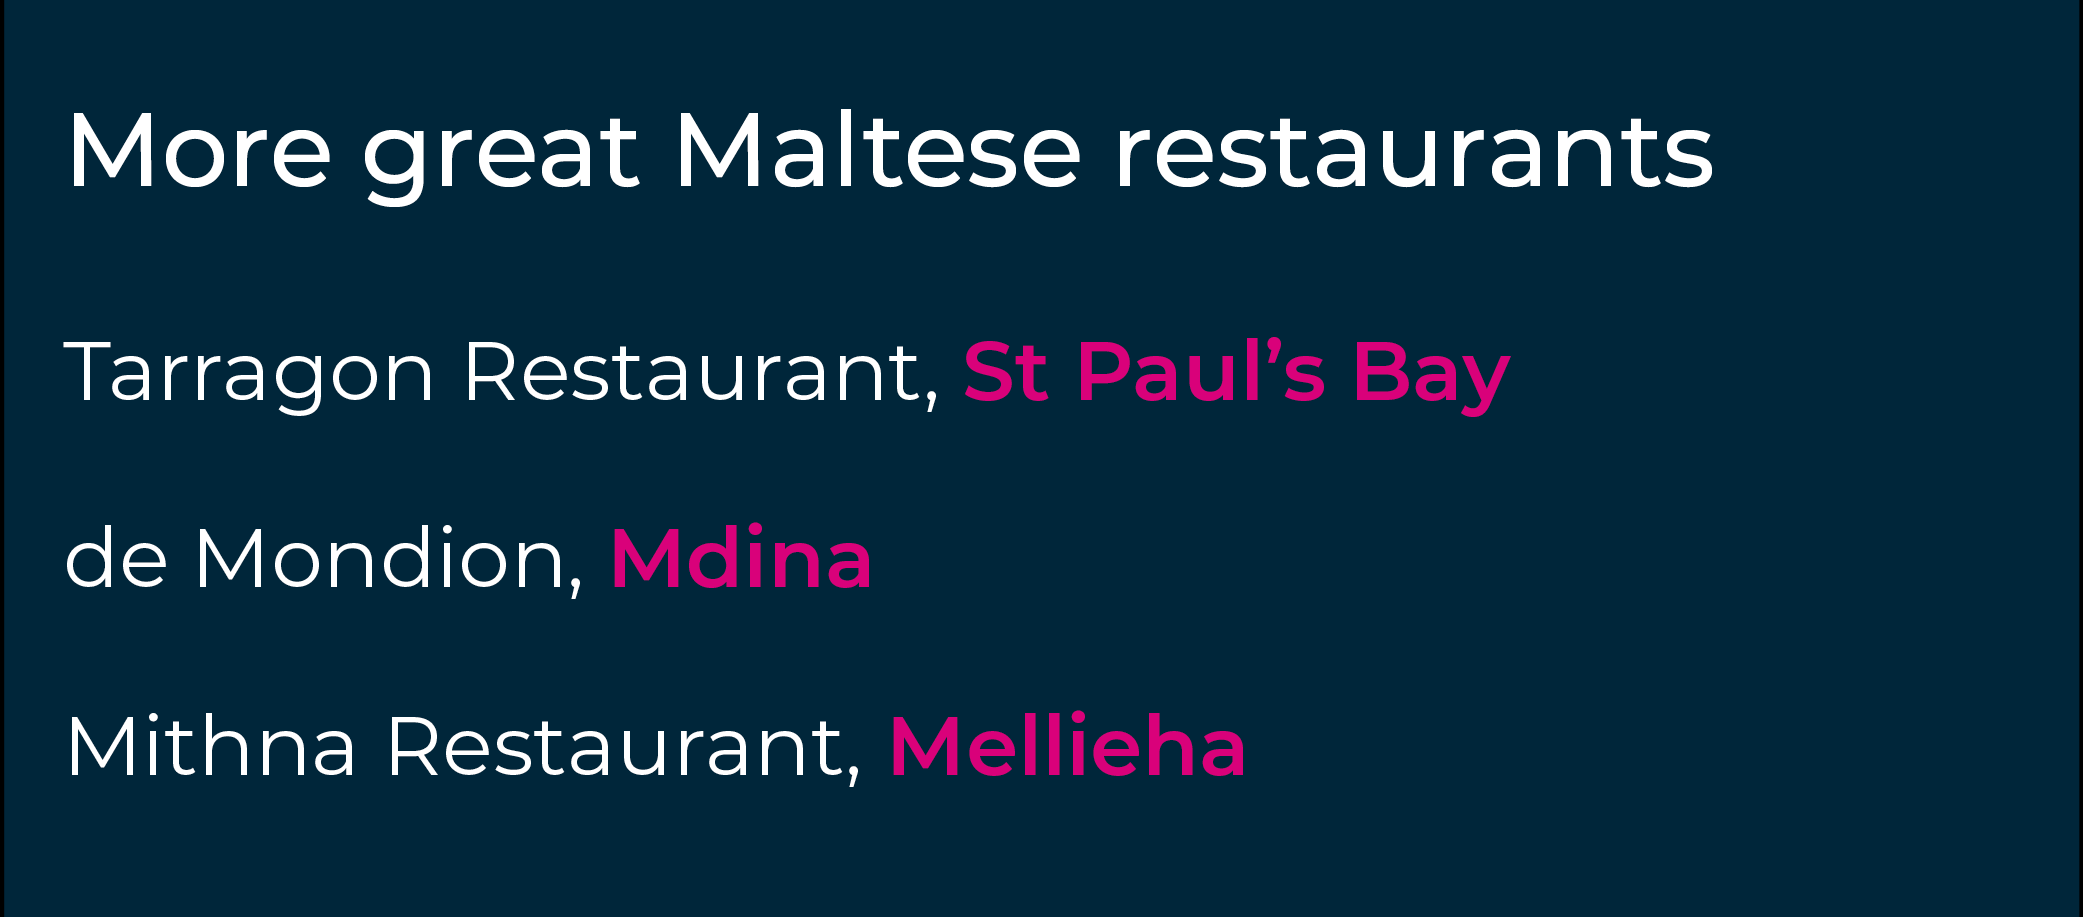 Hungry for more of Malta's must-try restaurants?